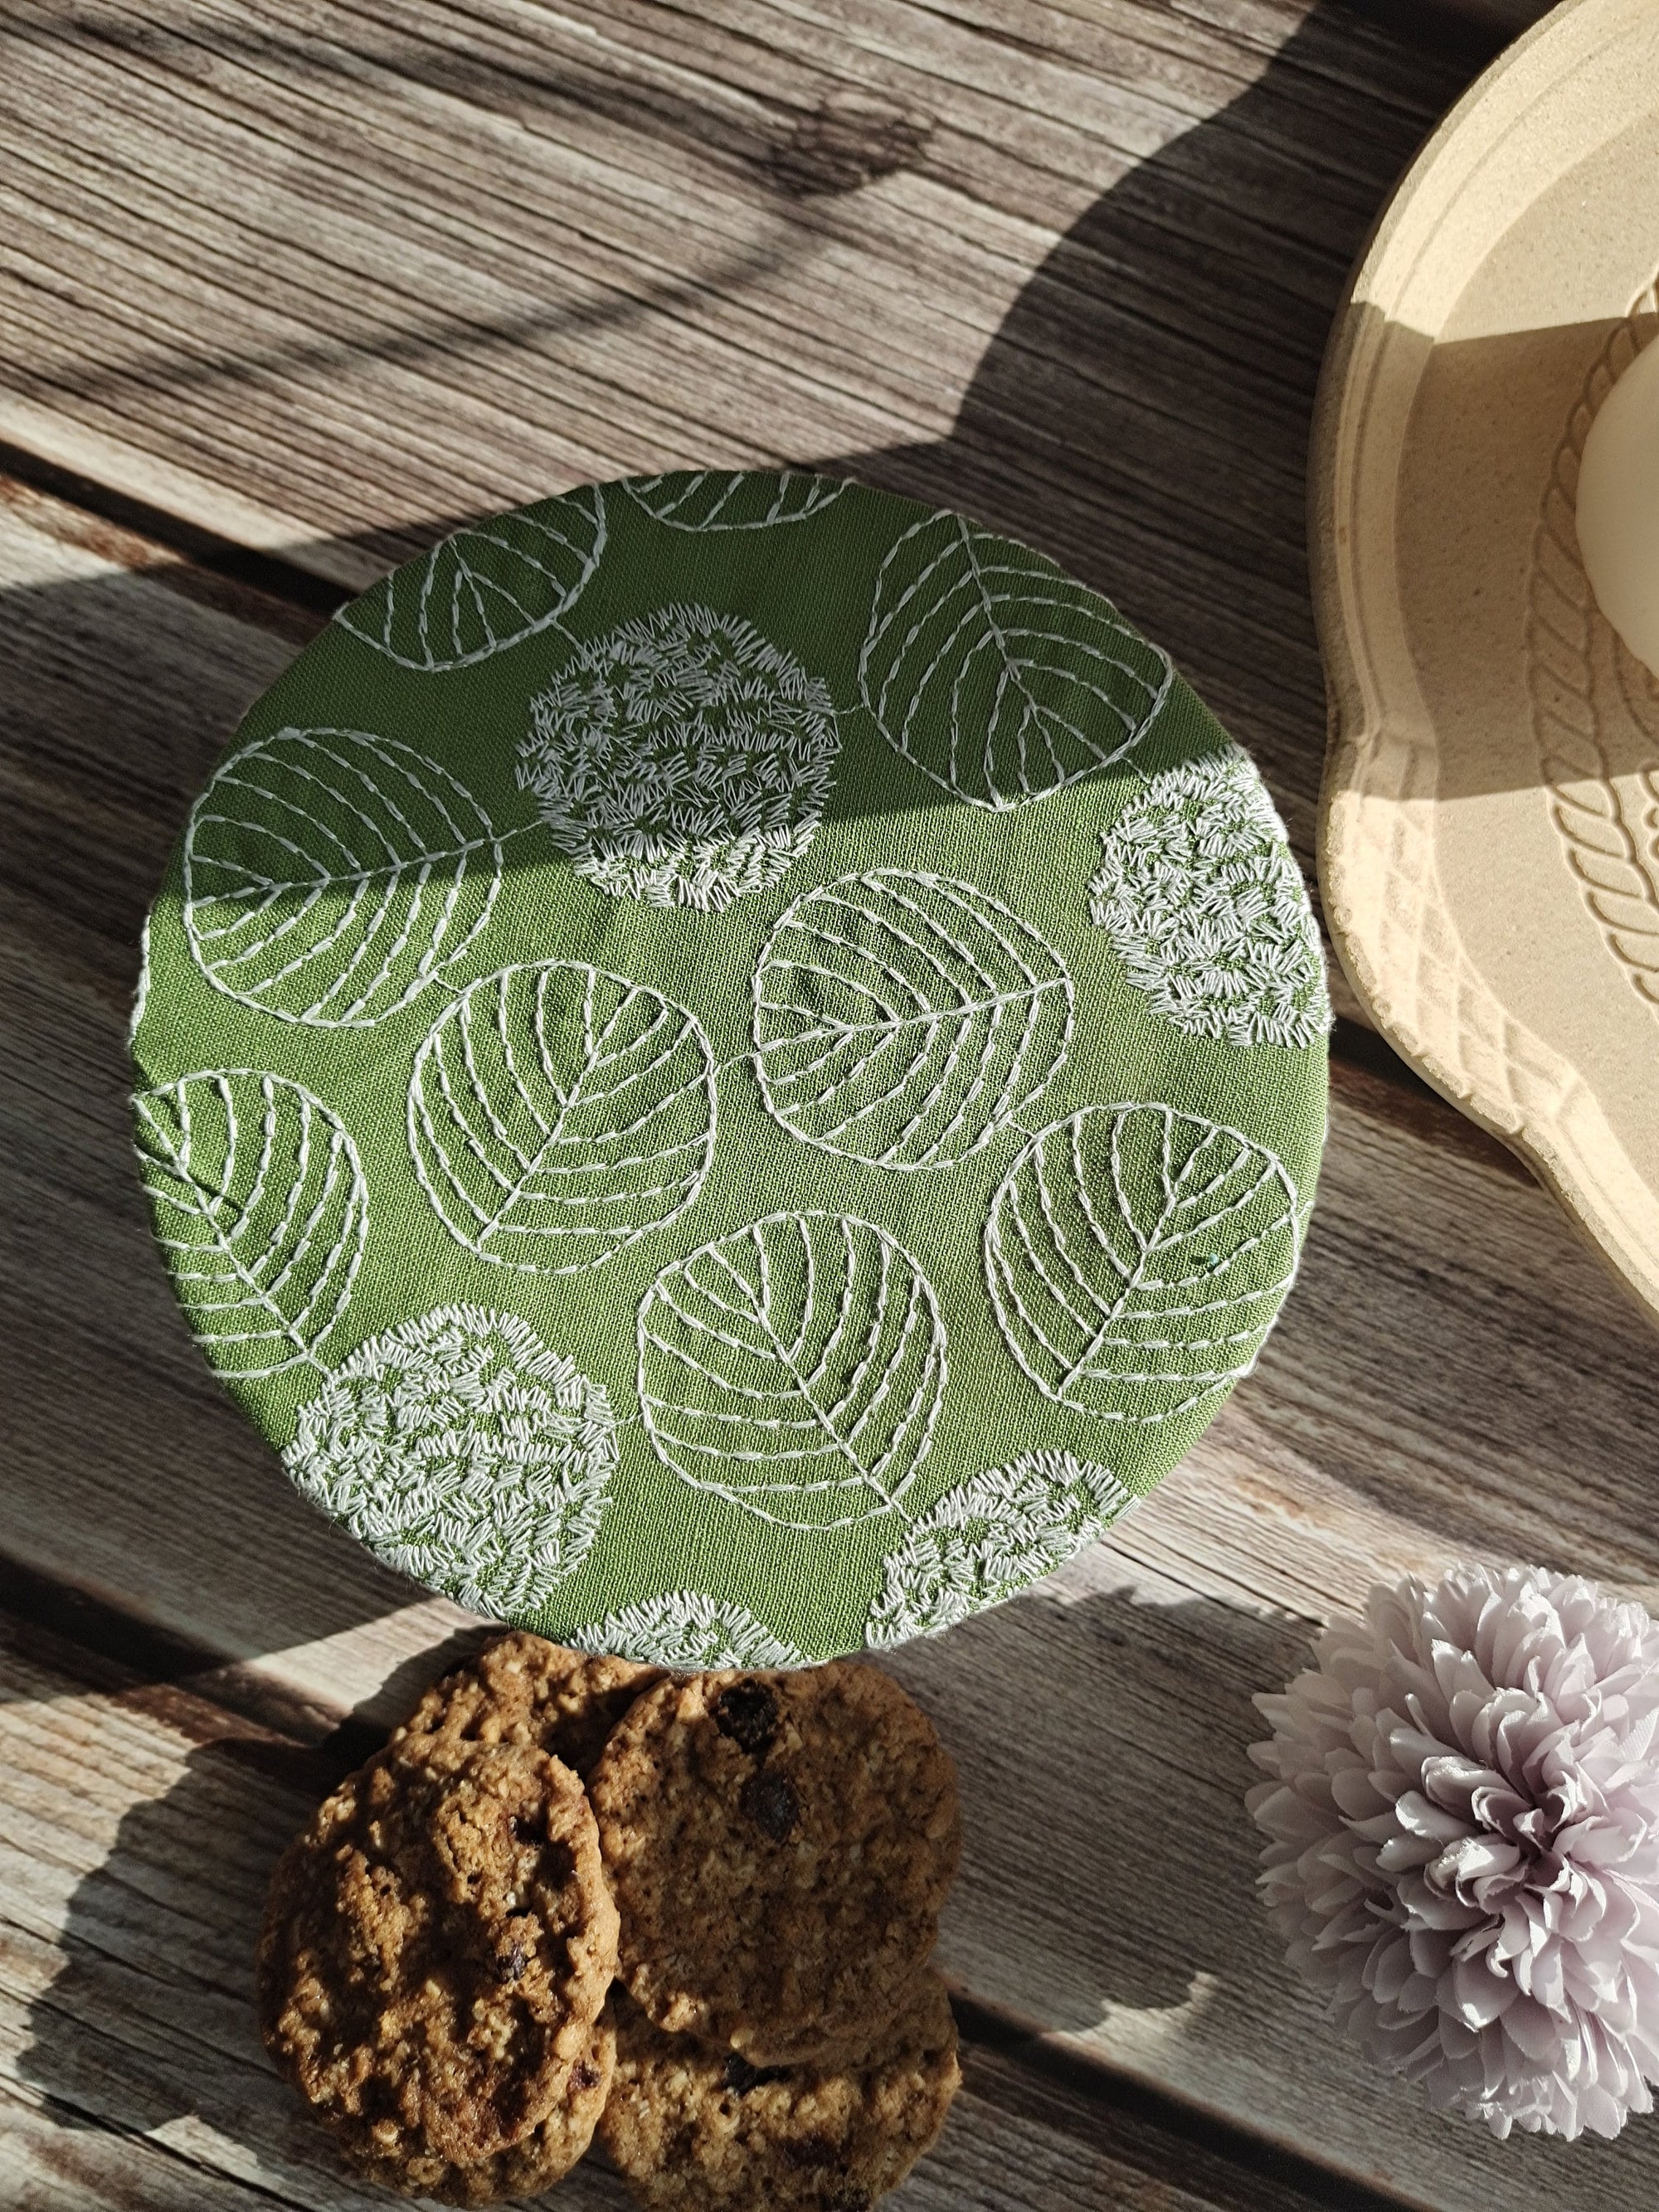 Reusable Bowl Covers Bread Proofing Cover Bread Baking Supplies, Washable Zero Waste Swap, Christmas Gift housewarming Embroidery style